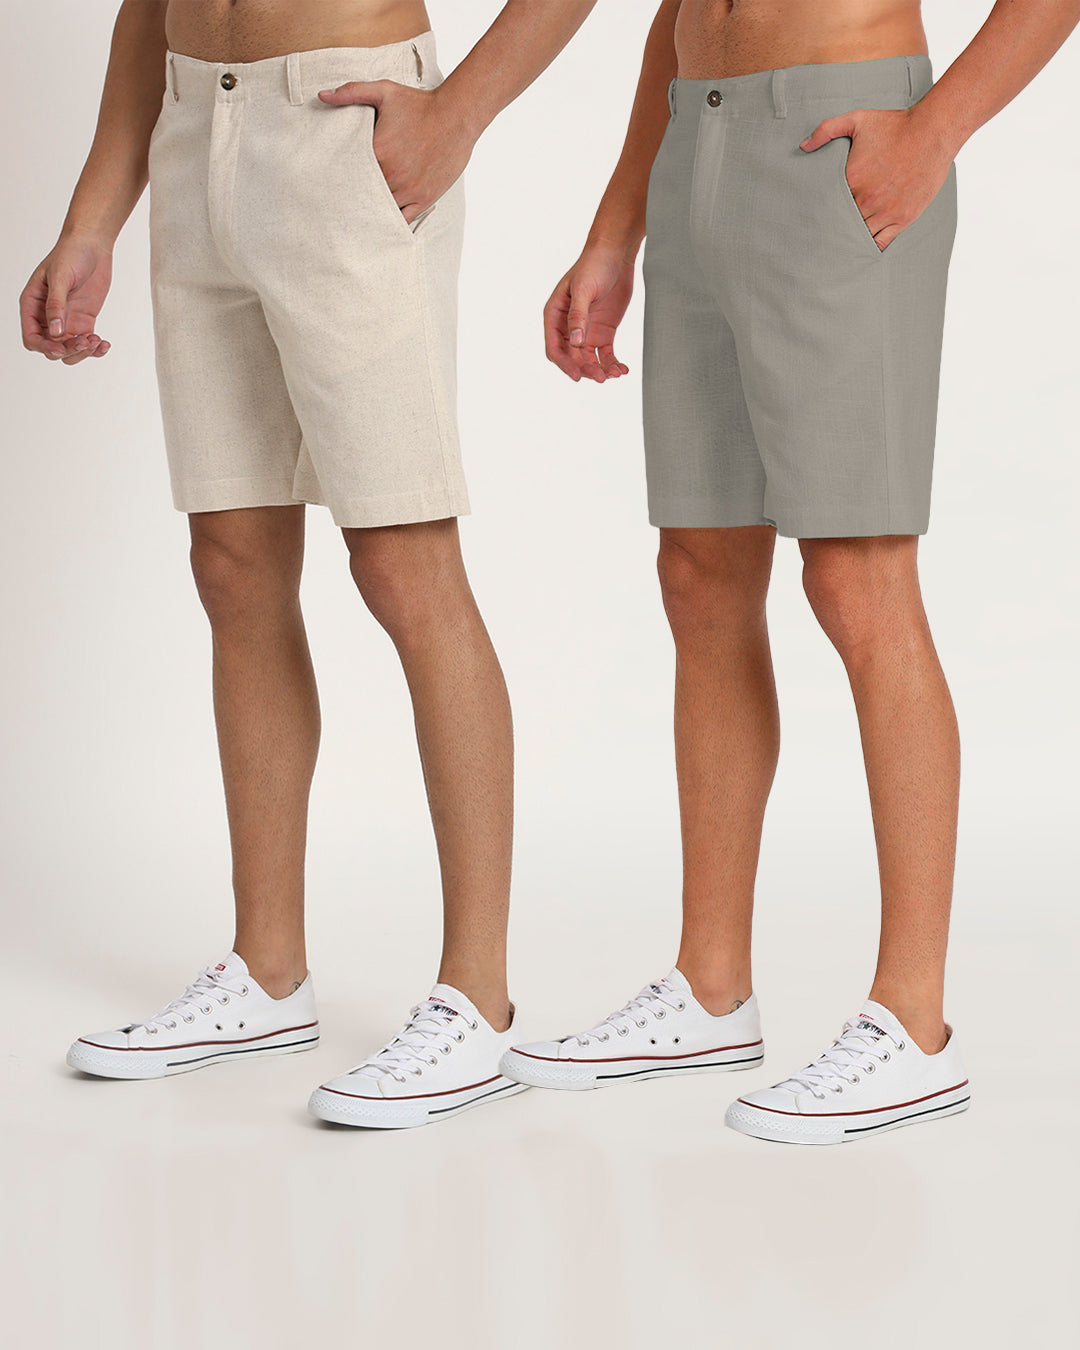 Combo : Ready For Anything Grey & Beige Men's Shorts